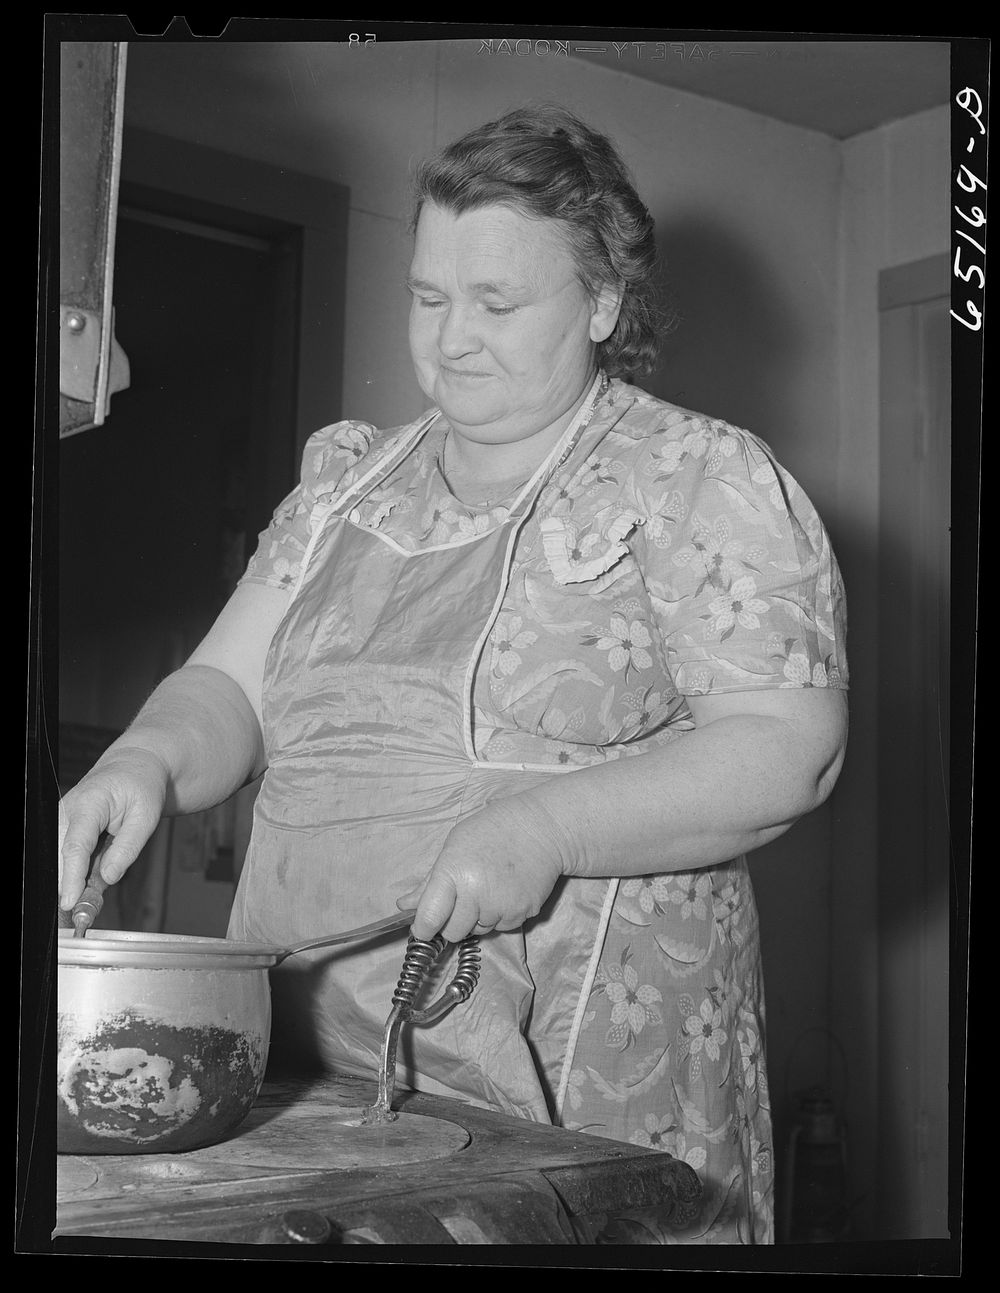 Flathead Valley special area project, Montana. Mrs. James Doyle at her kitchen stove. The Doyles are FSA (Farm Security…